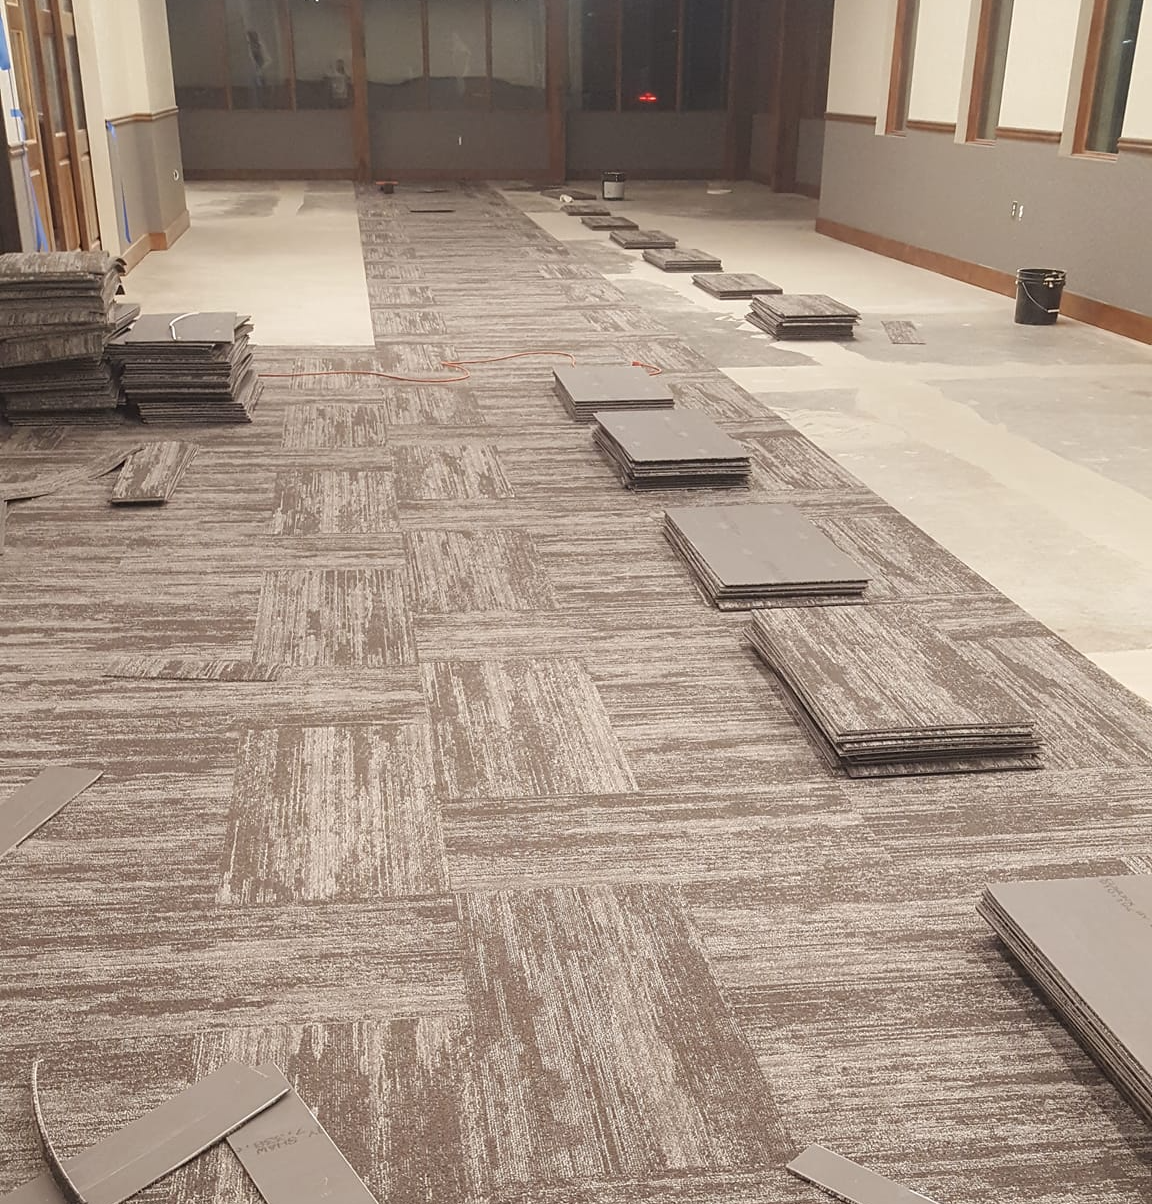 Progress is being made on the installation of these carpet tiles in this commercial space.